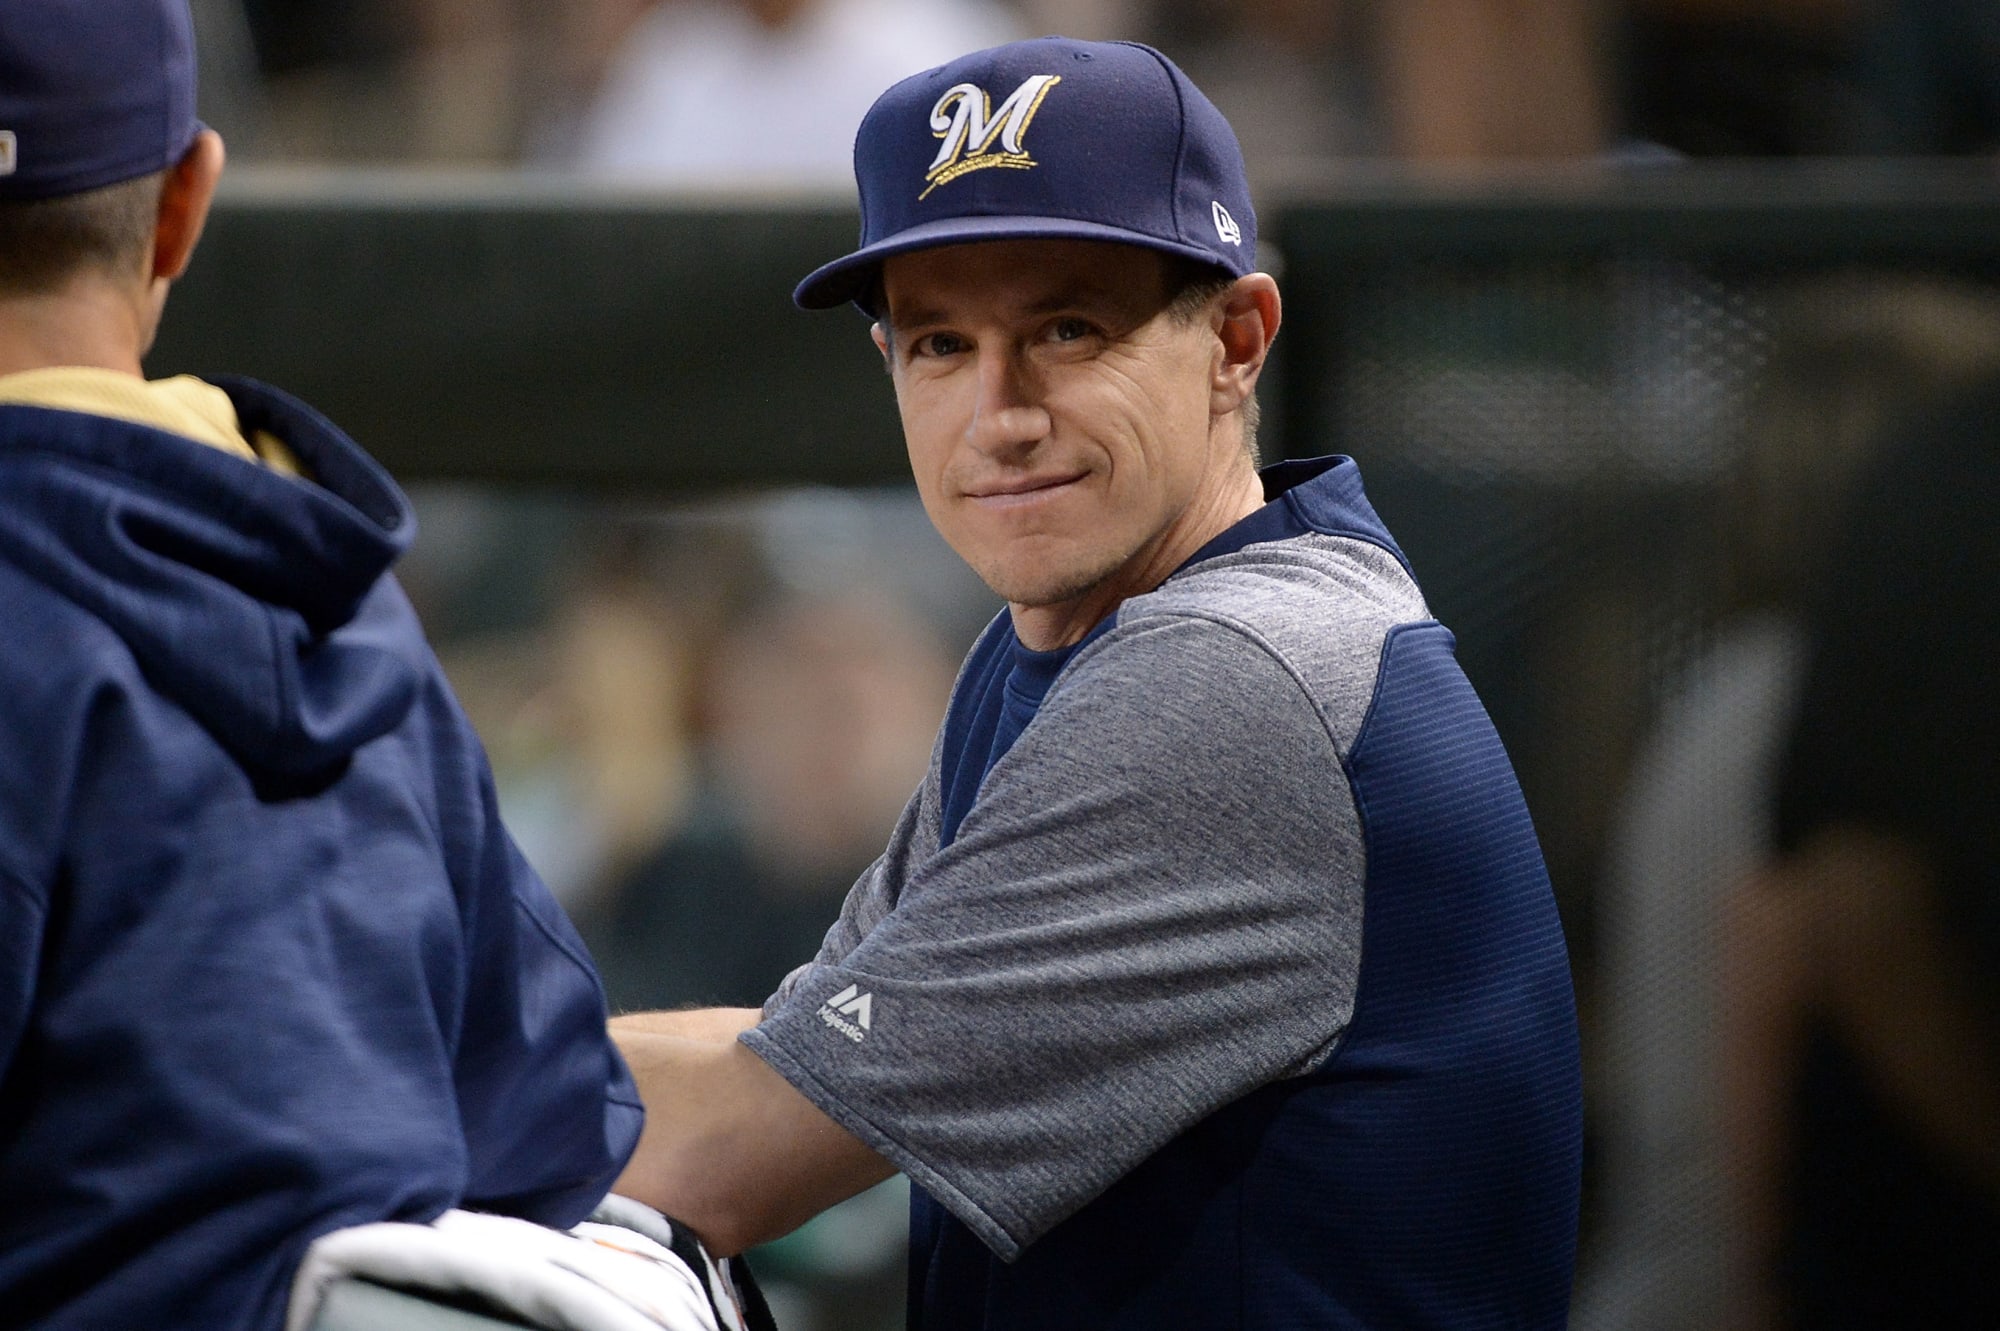 Milwaukee Brewers: Analyzing The 2018 Schedule